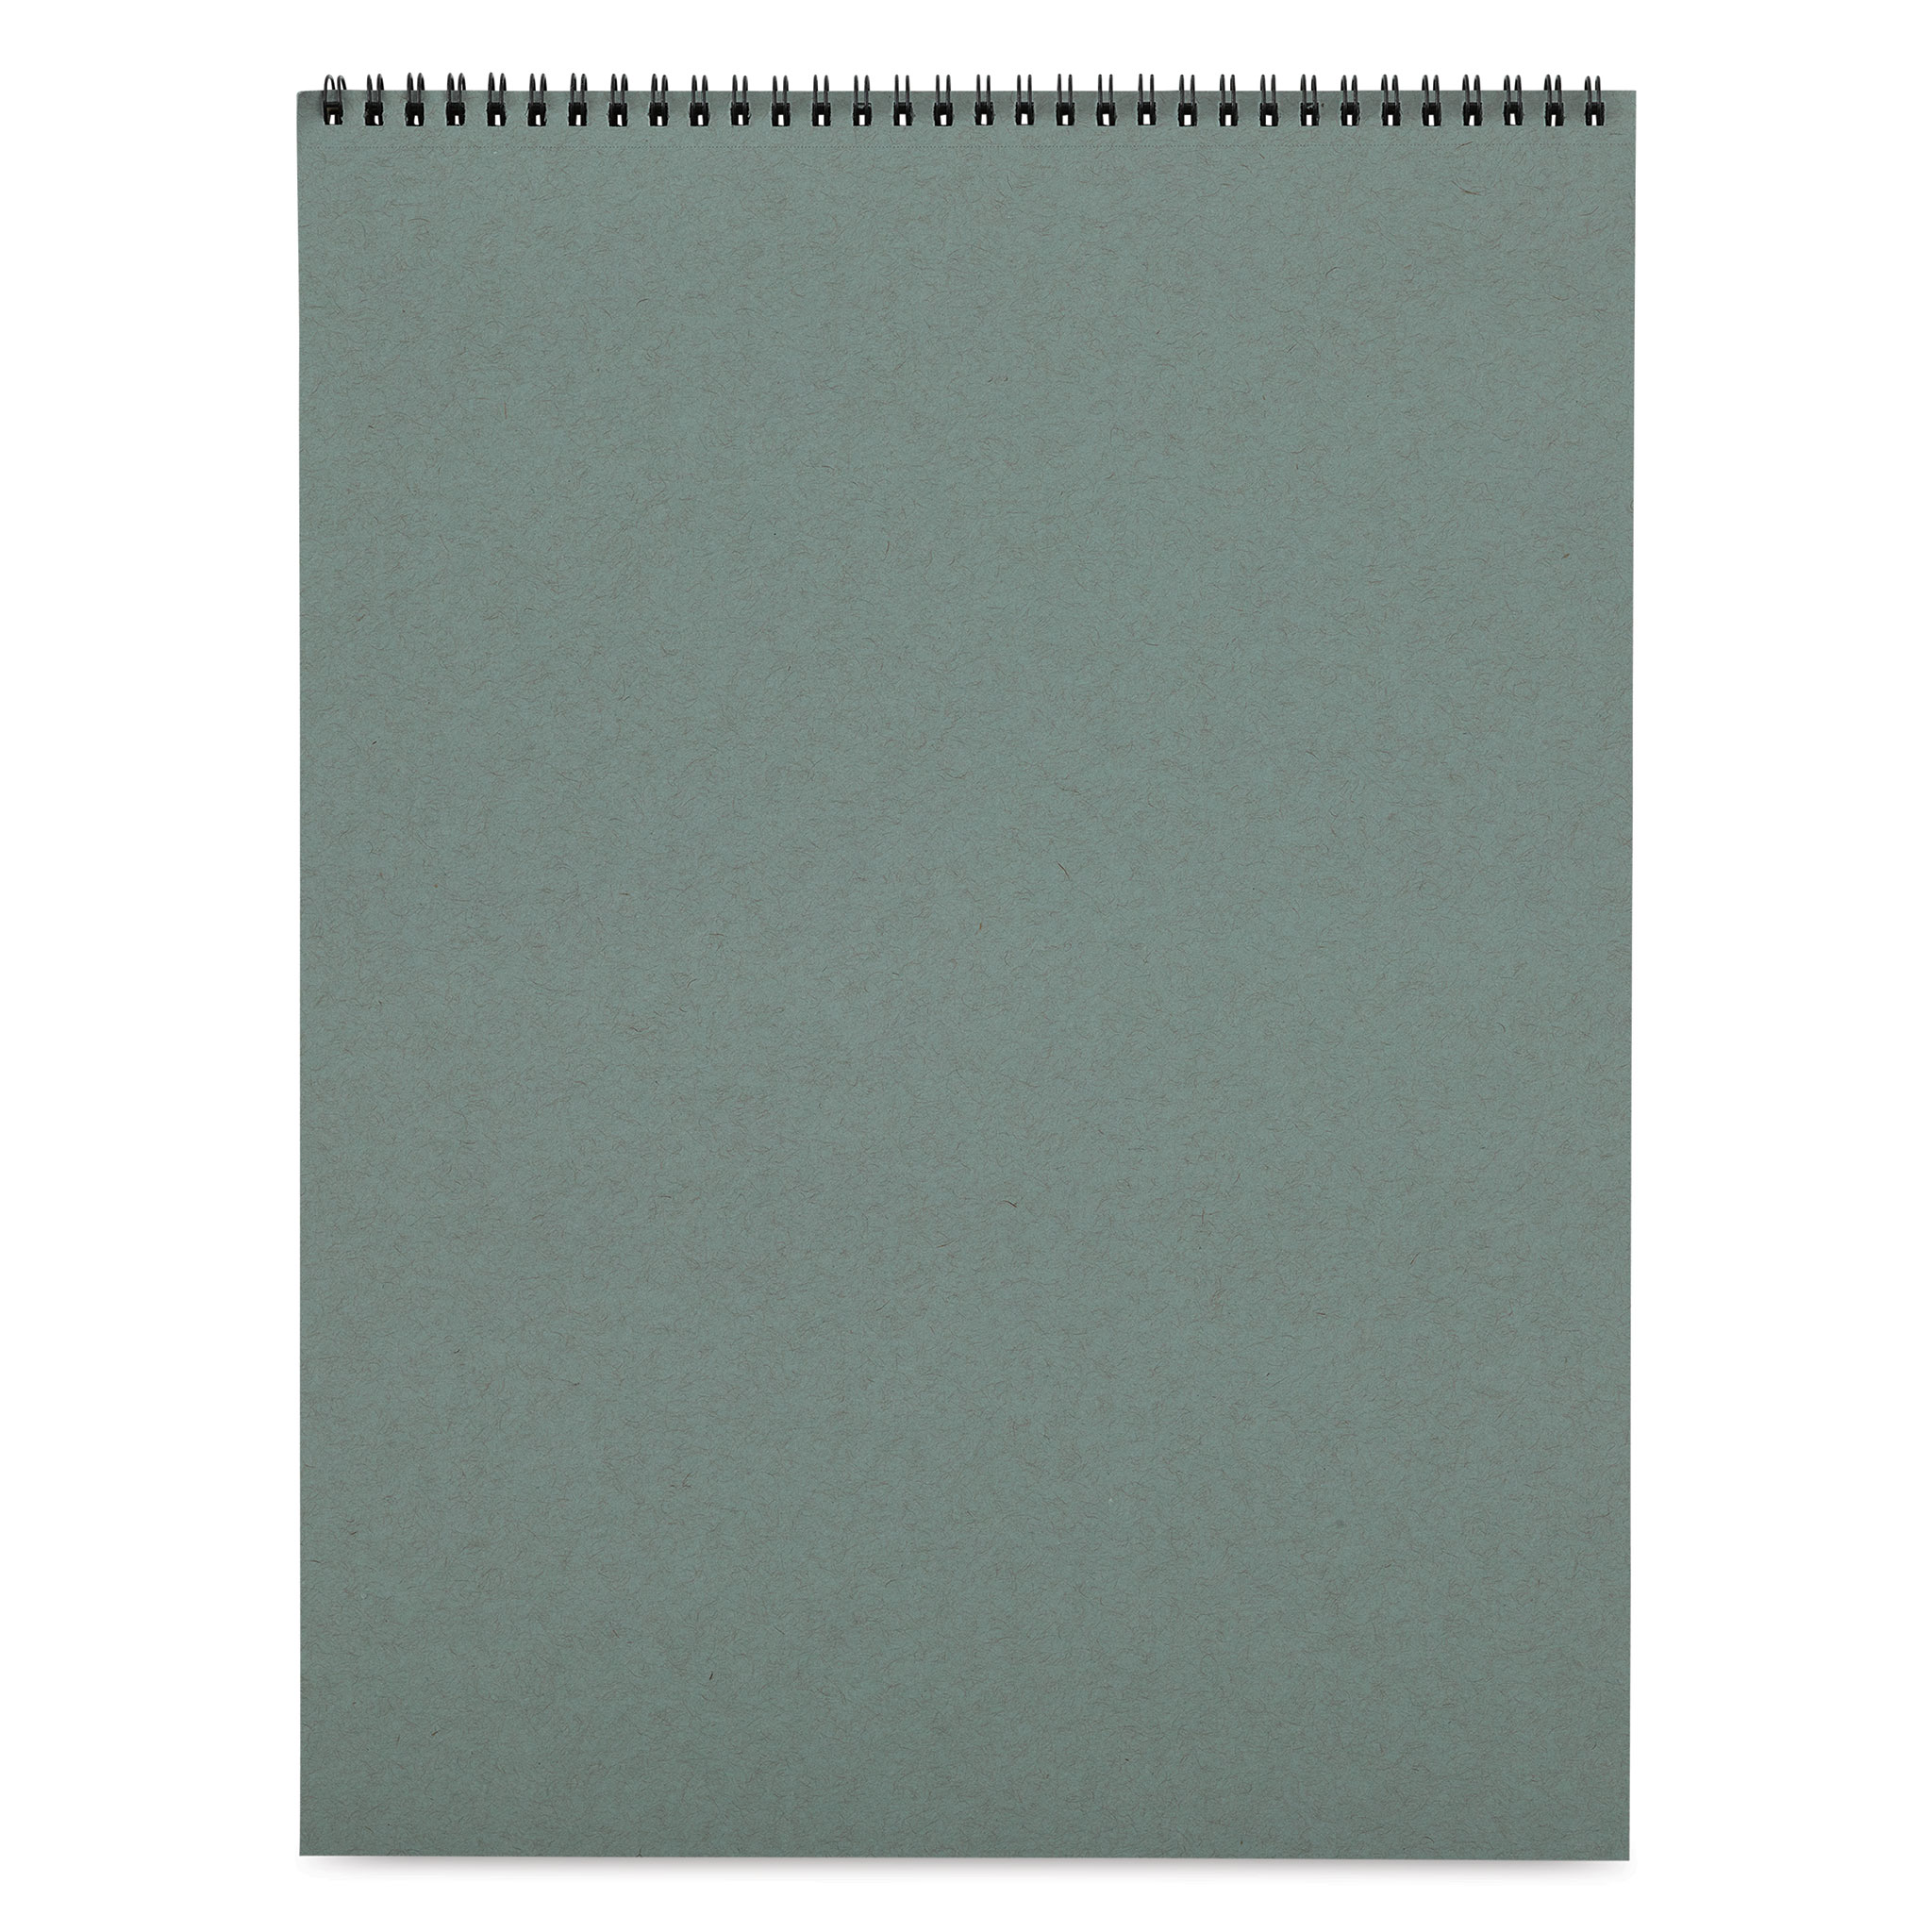 Strathmore 400 Series Recycled Toned Sketch Pad - 18 x 24, 24 Sheets,  Cool Gray